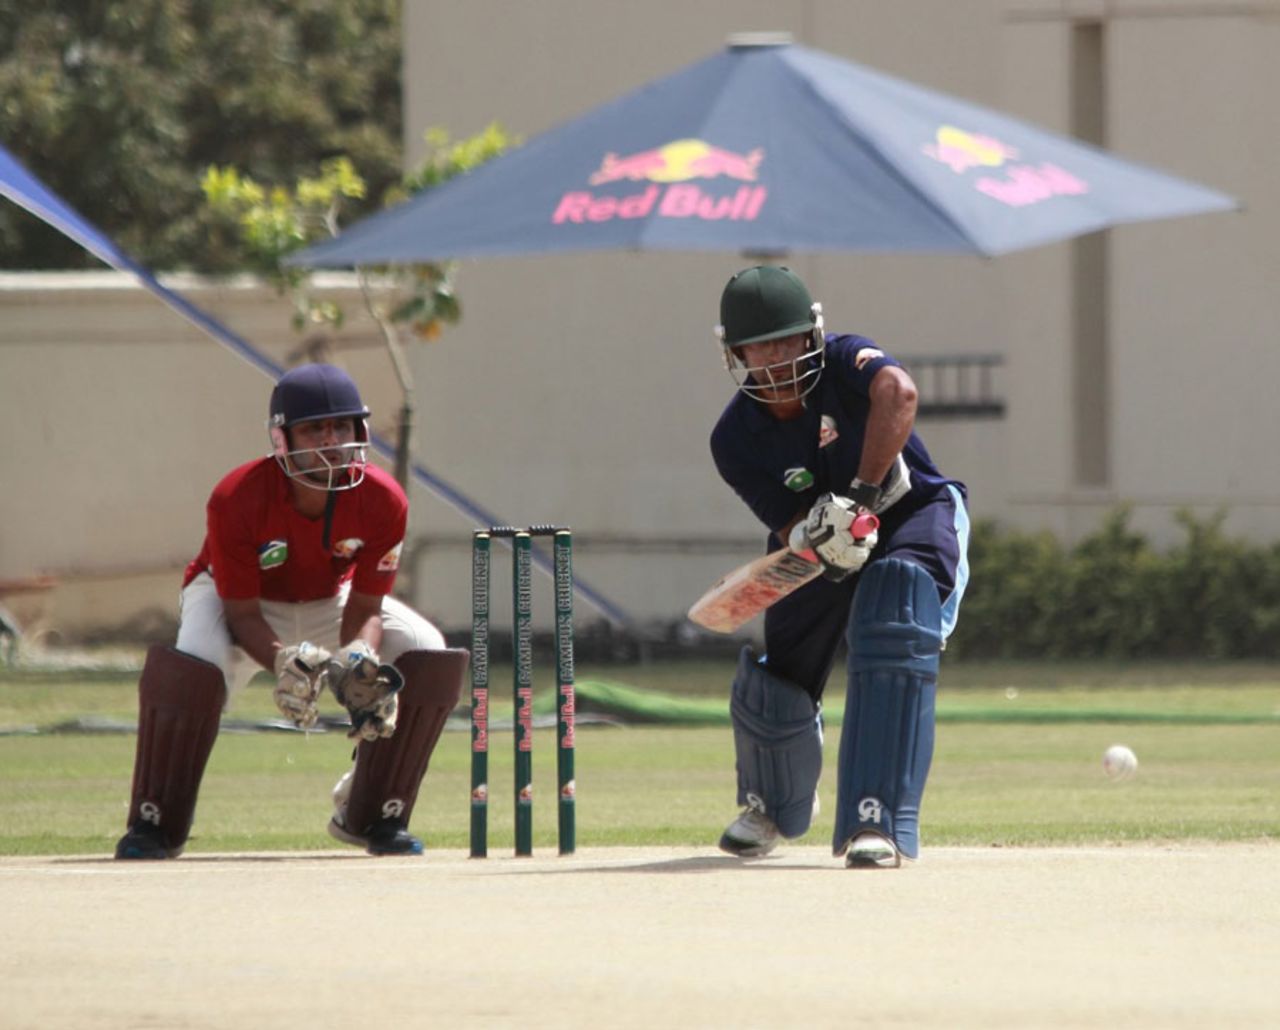 Punjab University Lahore made 123 for 7 in their innings, Punjab University Lahore v University of Sargodha, Red Bull Campus Cricket National Finals (Pakistan), 2014, Karachi, April 7, 2014